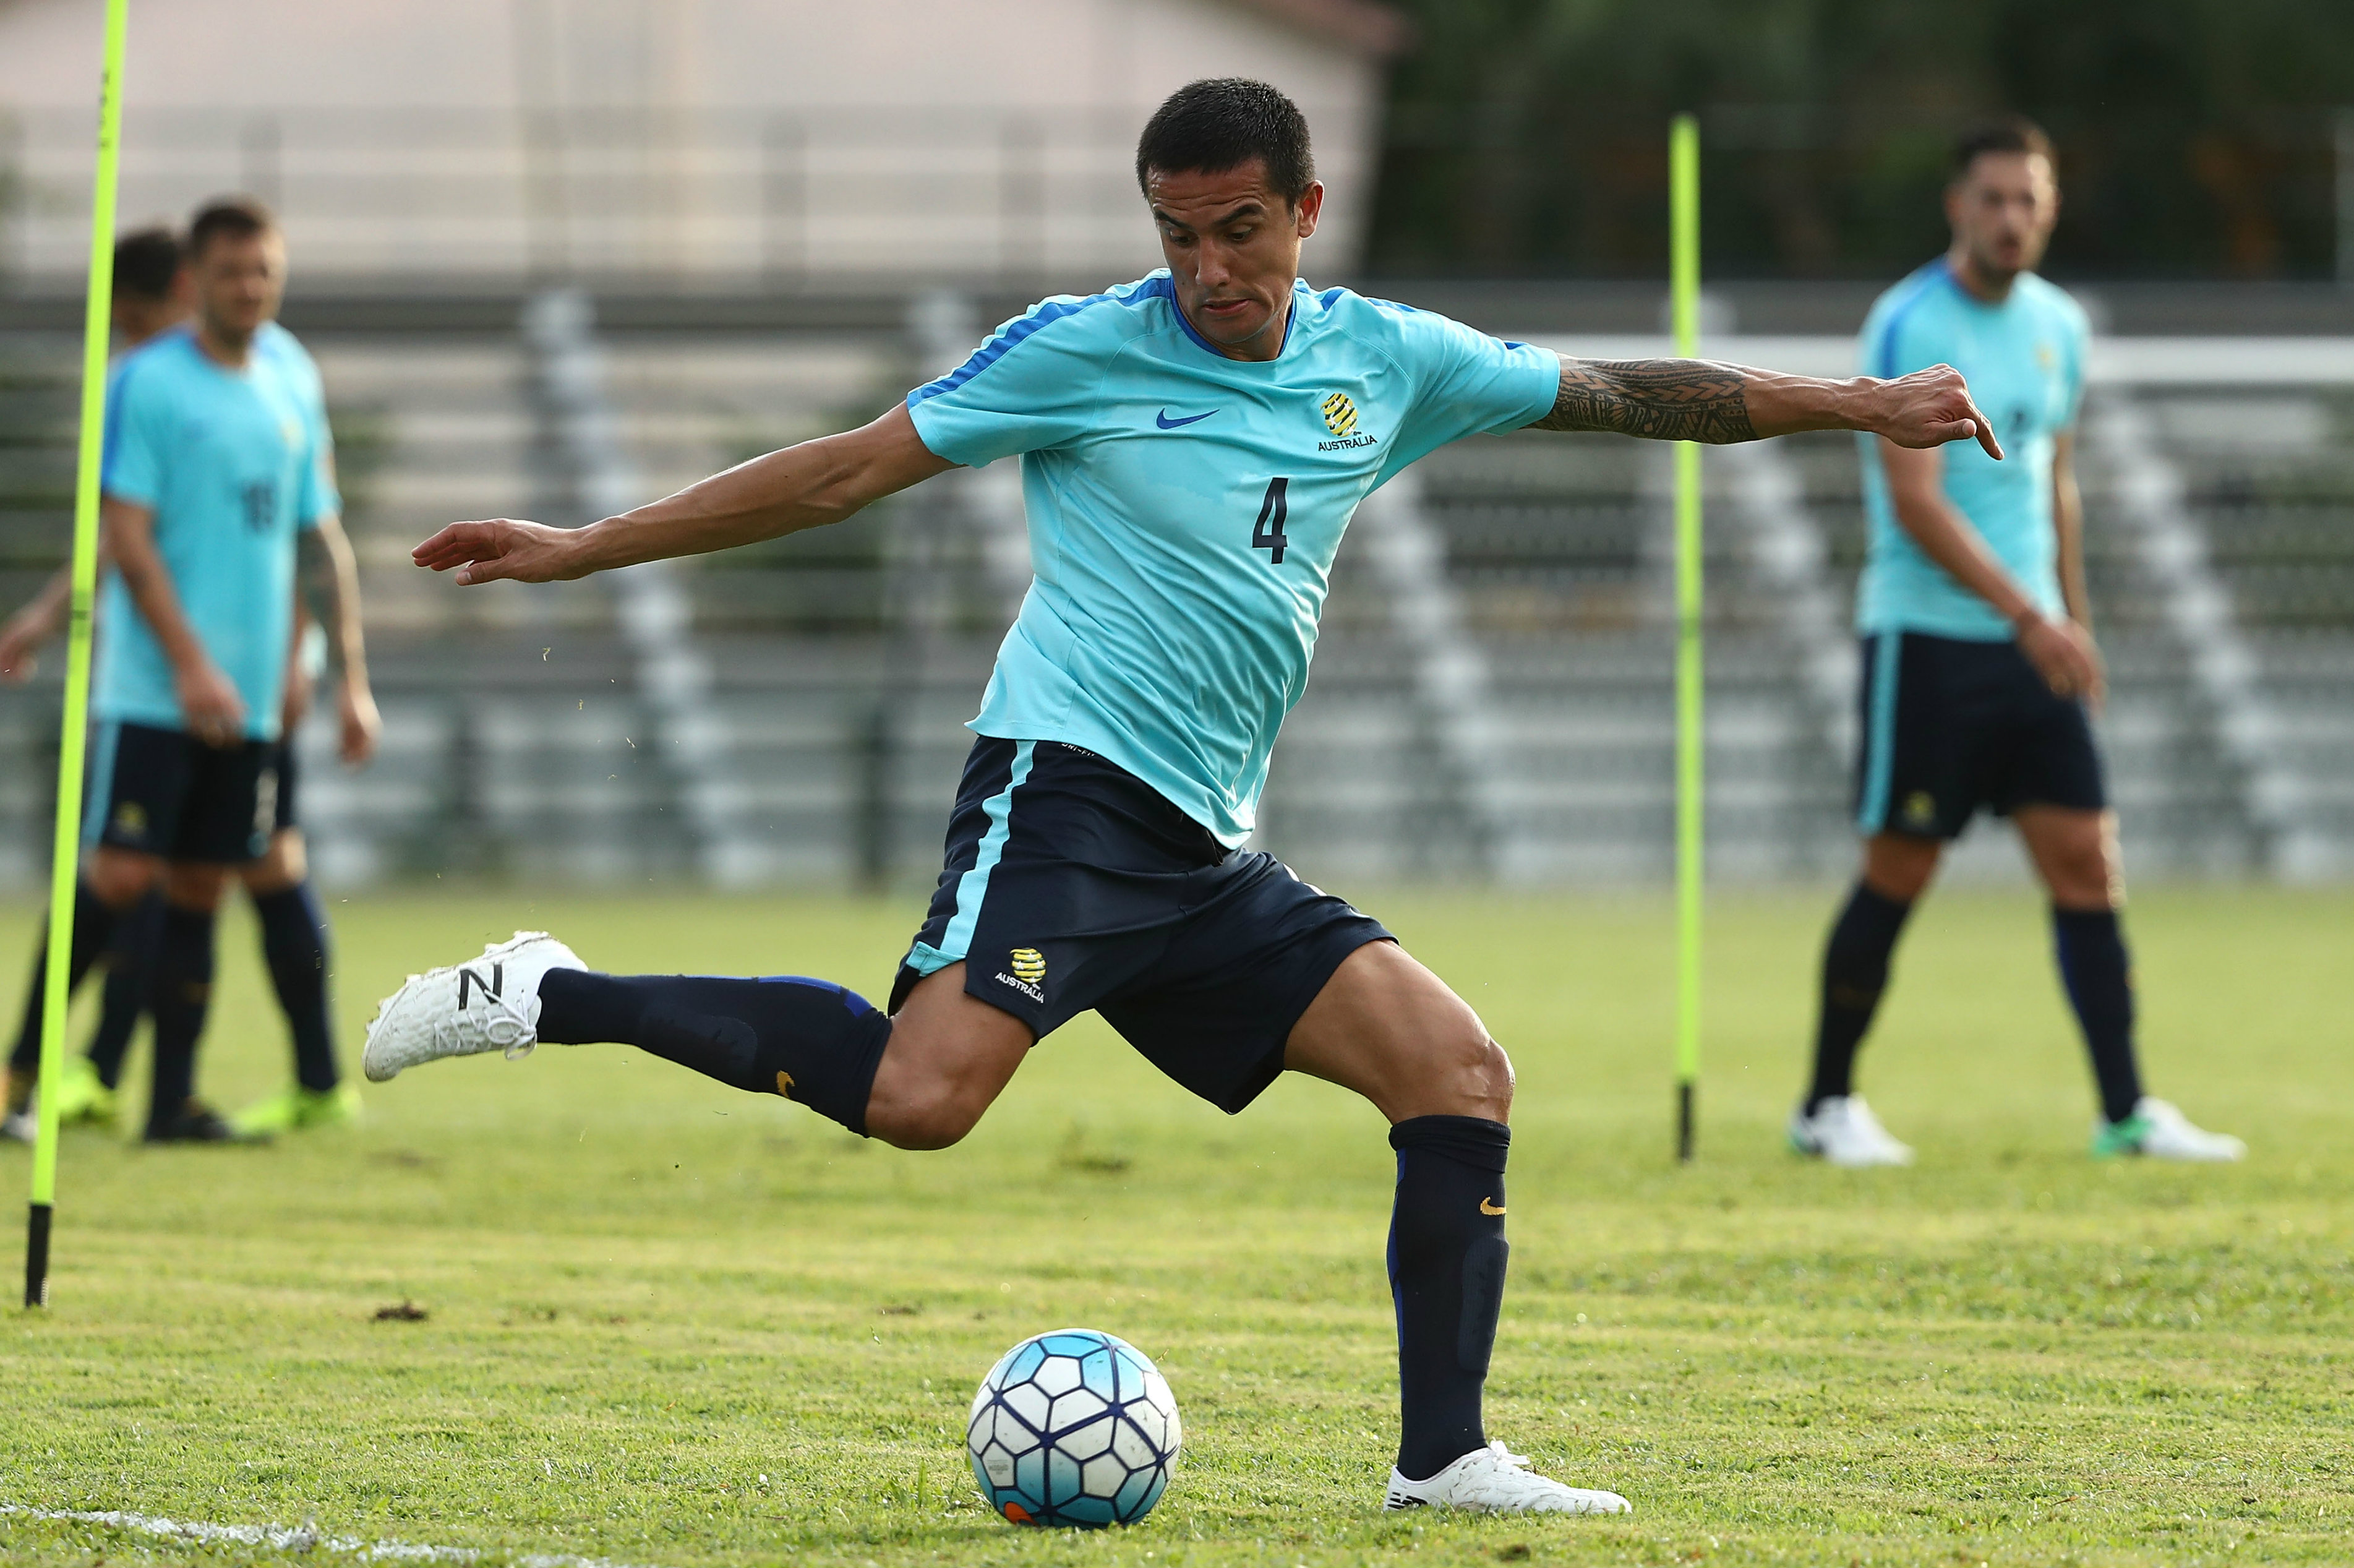 Will Tim Cahill deliver for the Caltex Socceroos yet again?